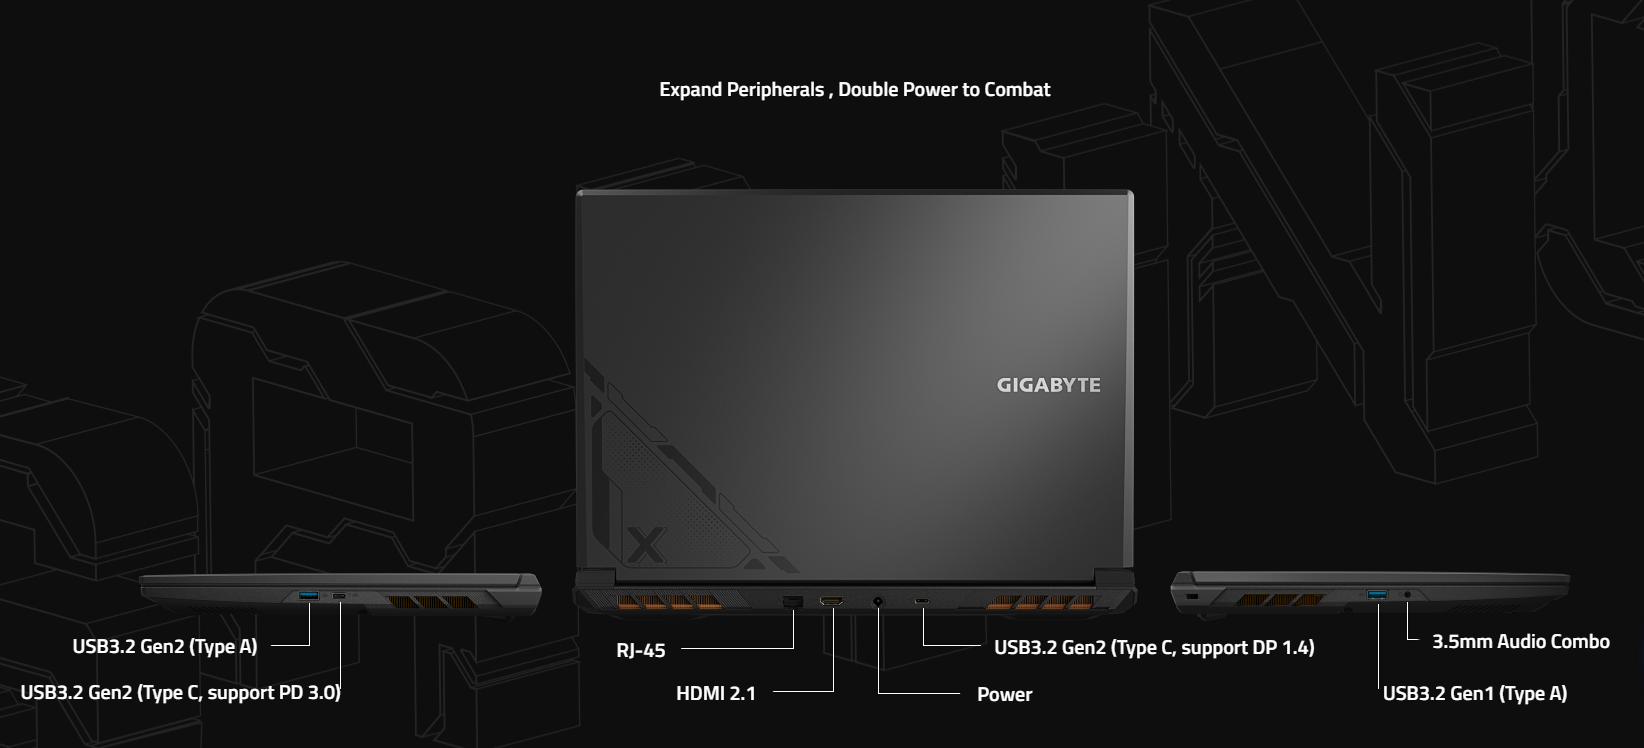 A large marketing image providing additional information about the product Gigabyte G6X (9MG) - 16" 165Hz, 13th Gen i7, RTX 4050, 16GB/1TB - Win 11 Gaming Notebook - Additional alt info not provided